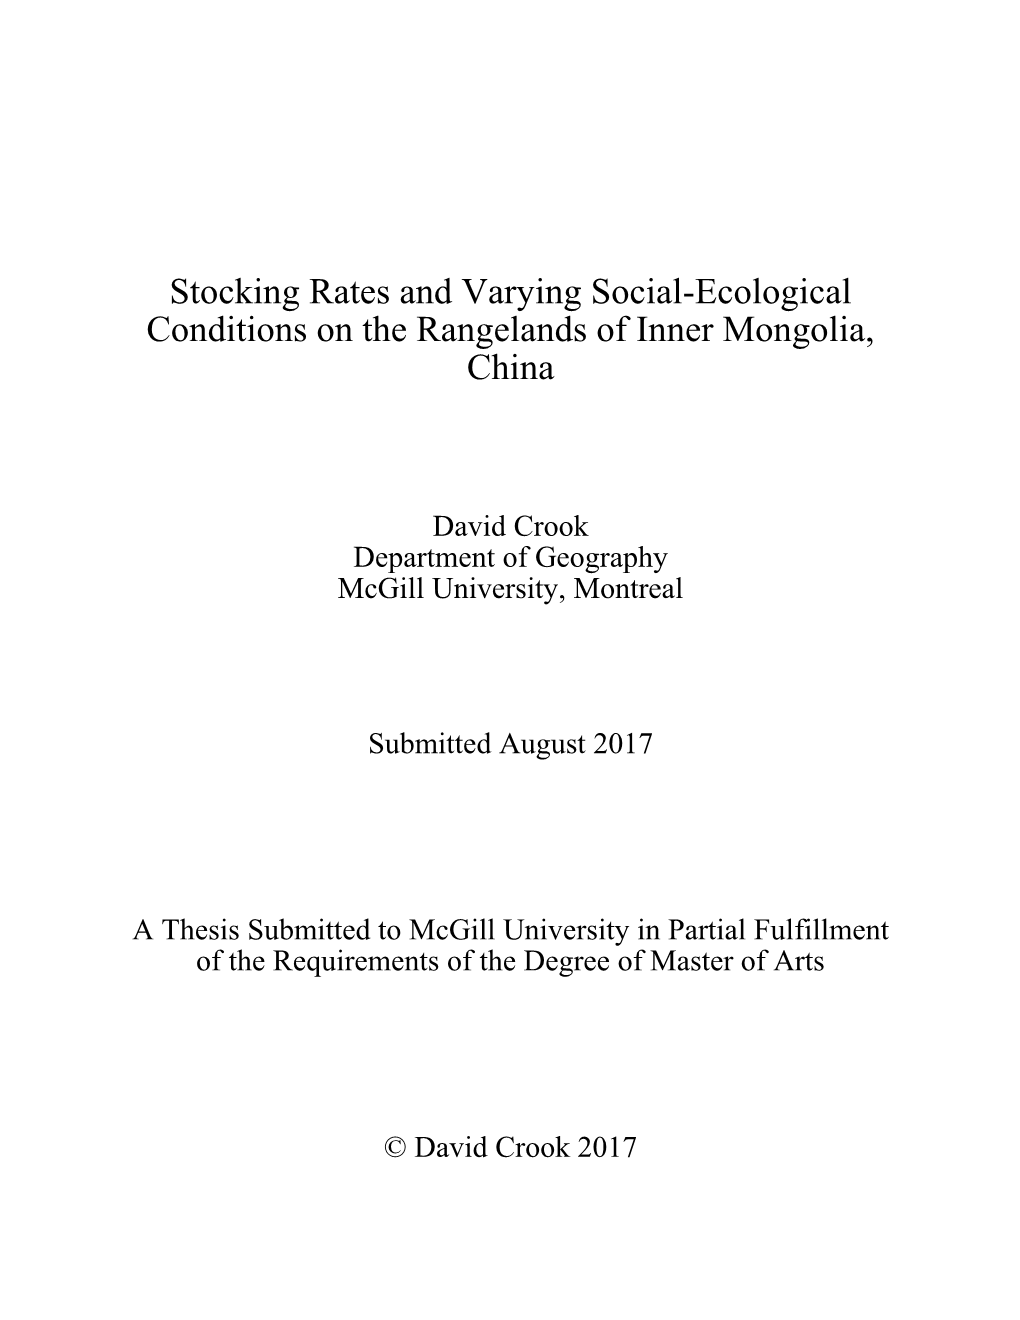 Stocking Rates and Varying Social-Ecological Conditions on the Rangelands of Inner Mongolia, China